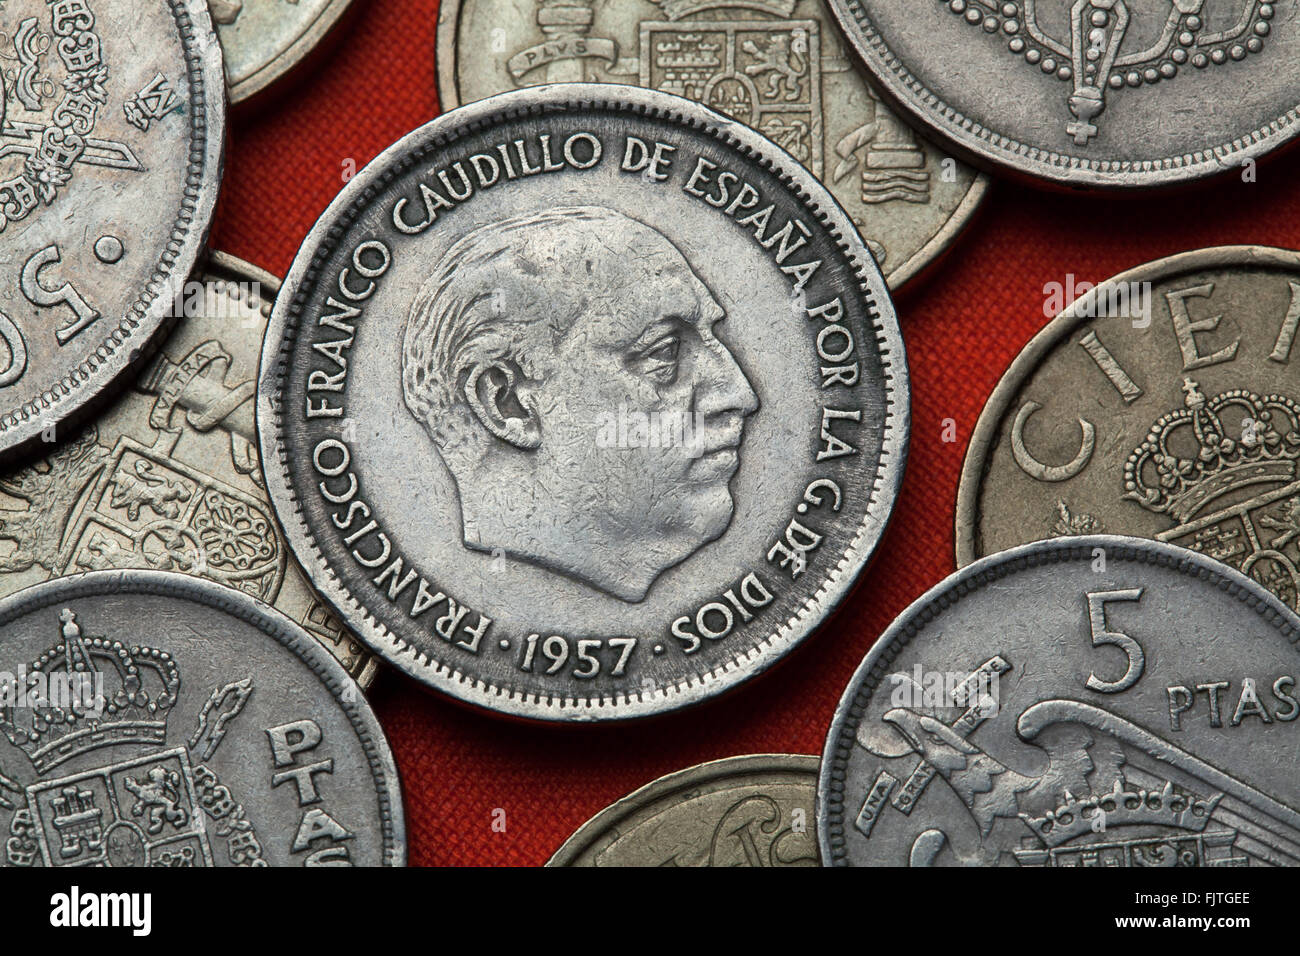 Coins of Spain. Spanish dictator Francisco Franco depicted in the Spanish 25 peseta coin (1957). Stock Photo